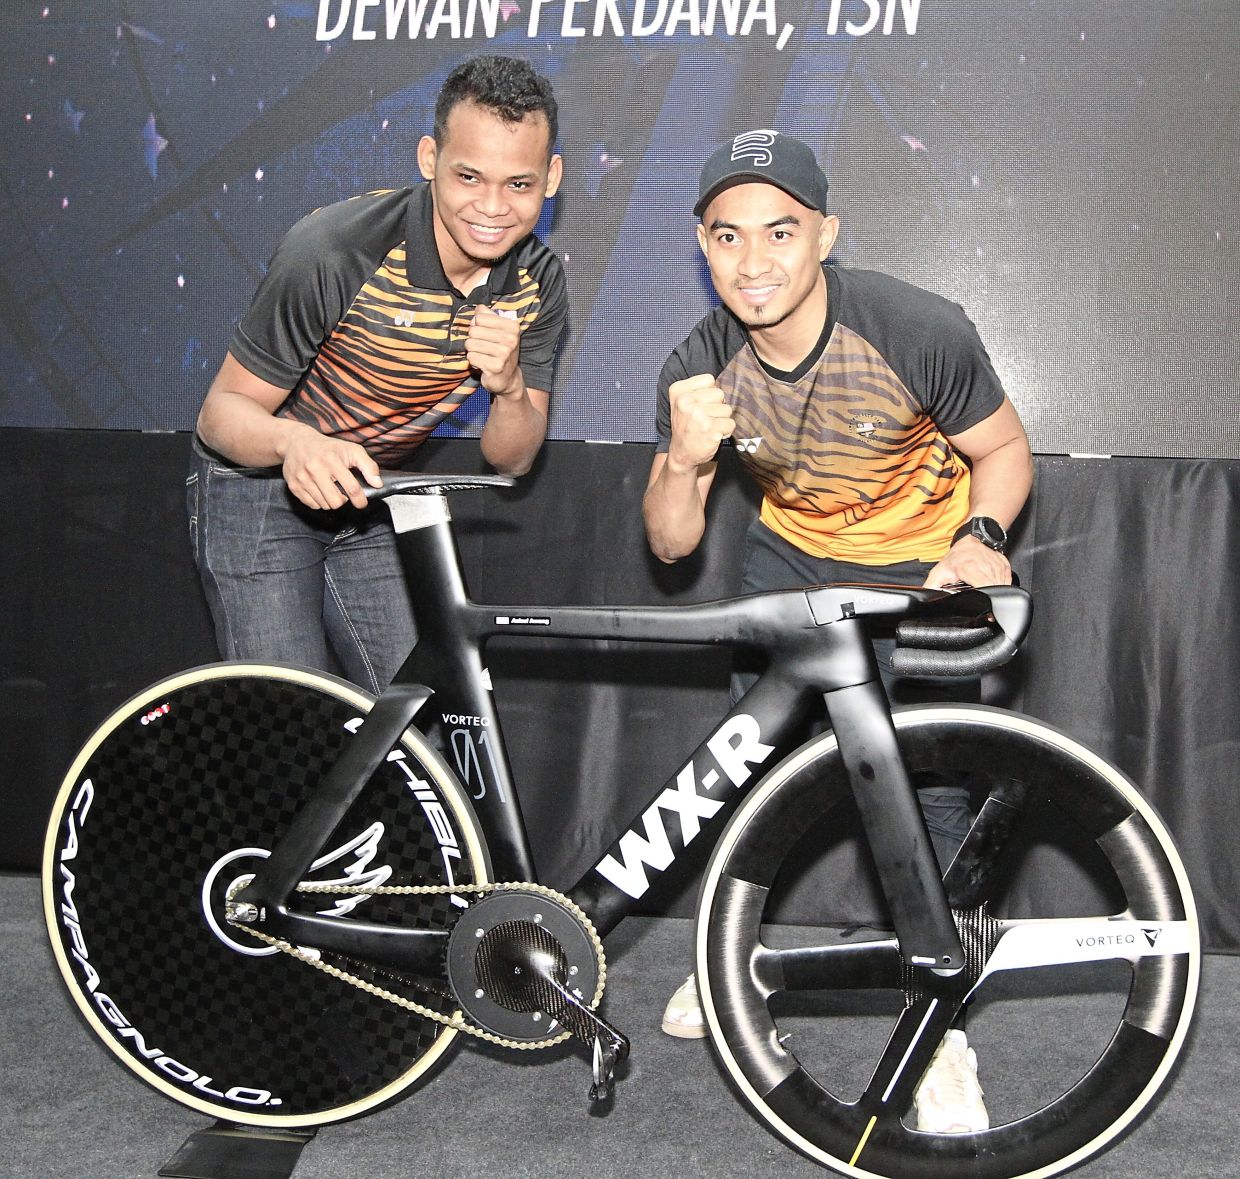 Azizul and Shah Firdaus skip final round of Nations Cup to focus on high-intensity training in Melbourne